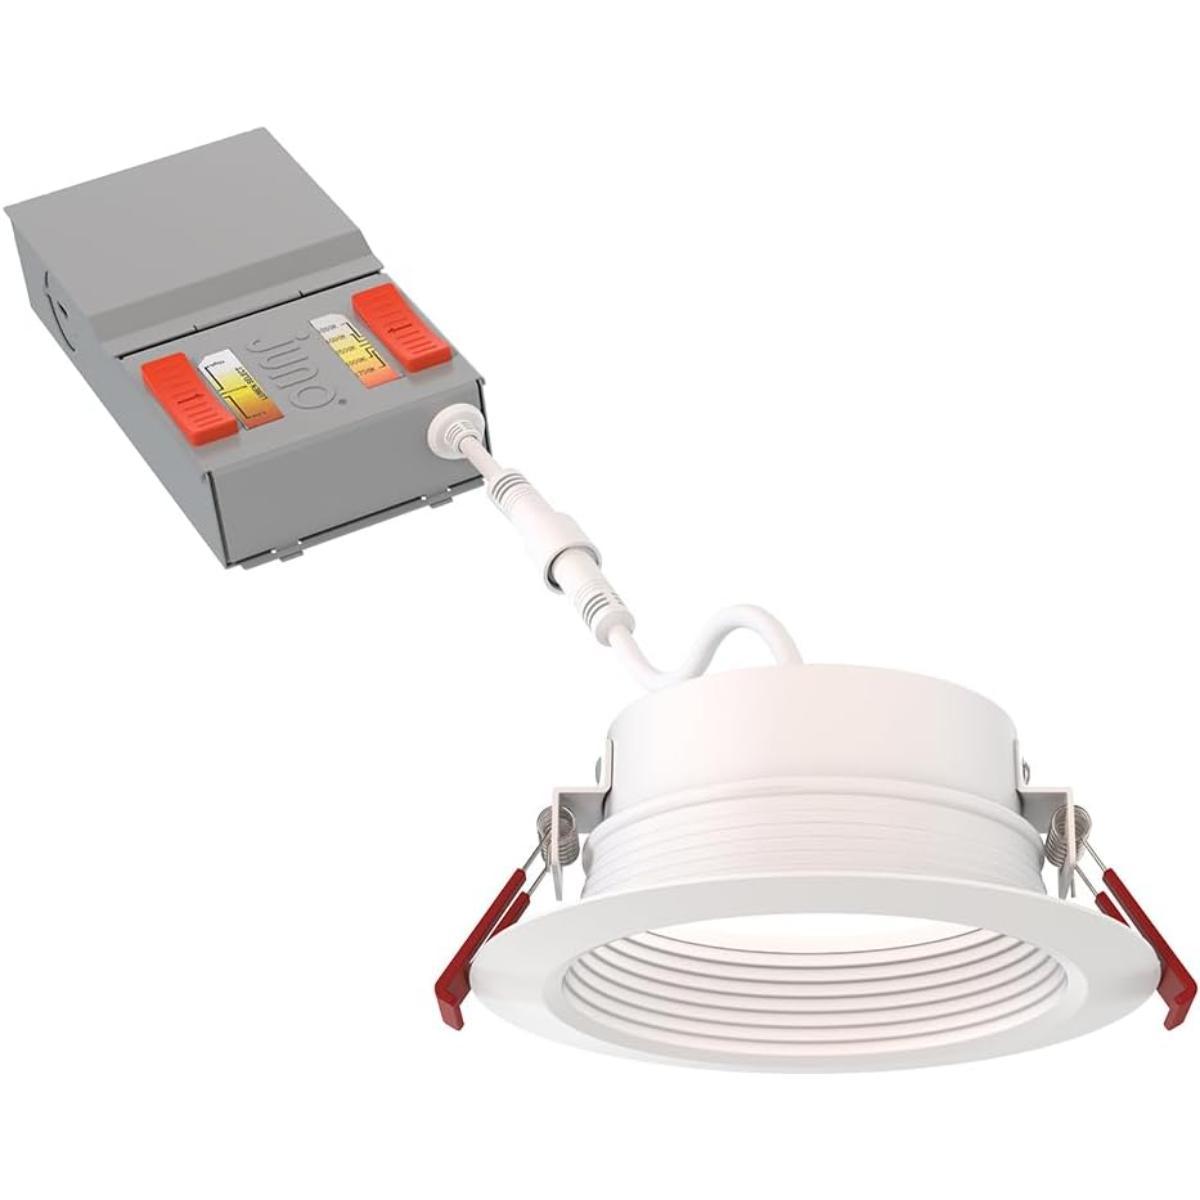 4 inch Wafer Canless LED Recessed Light, 14.5 Watt, 1100 Lumens, Selectable CCT, 2700K to 5000K, Baffle Trim